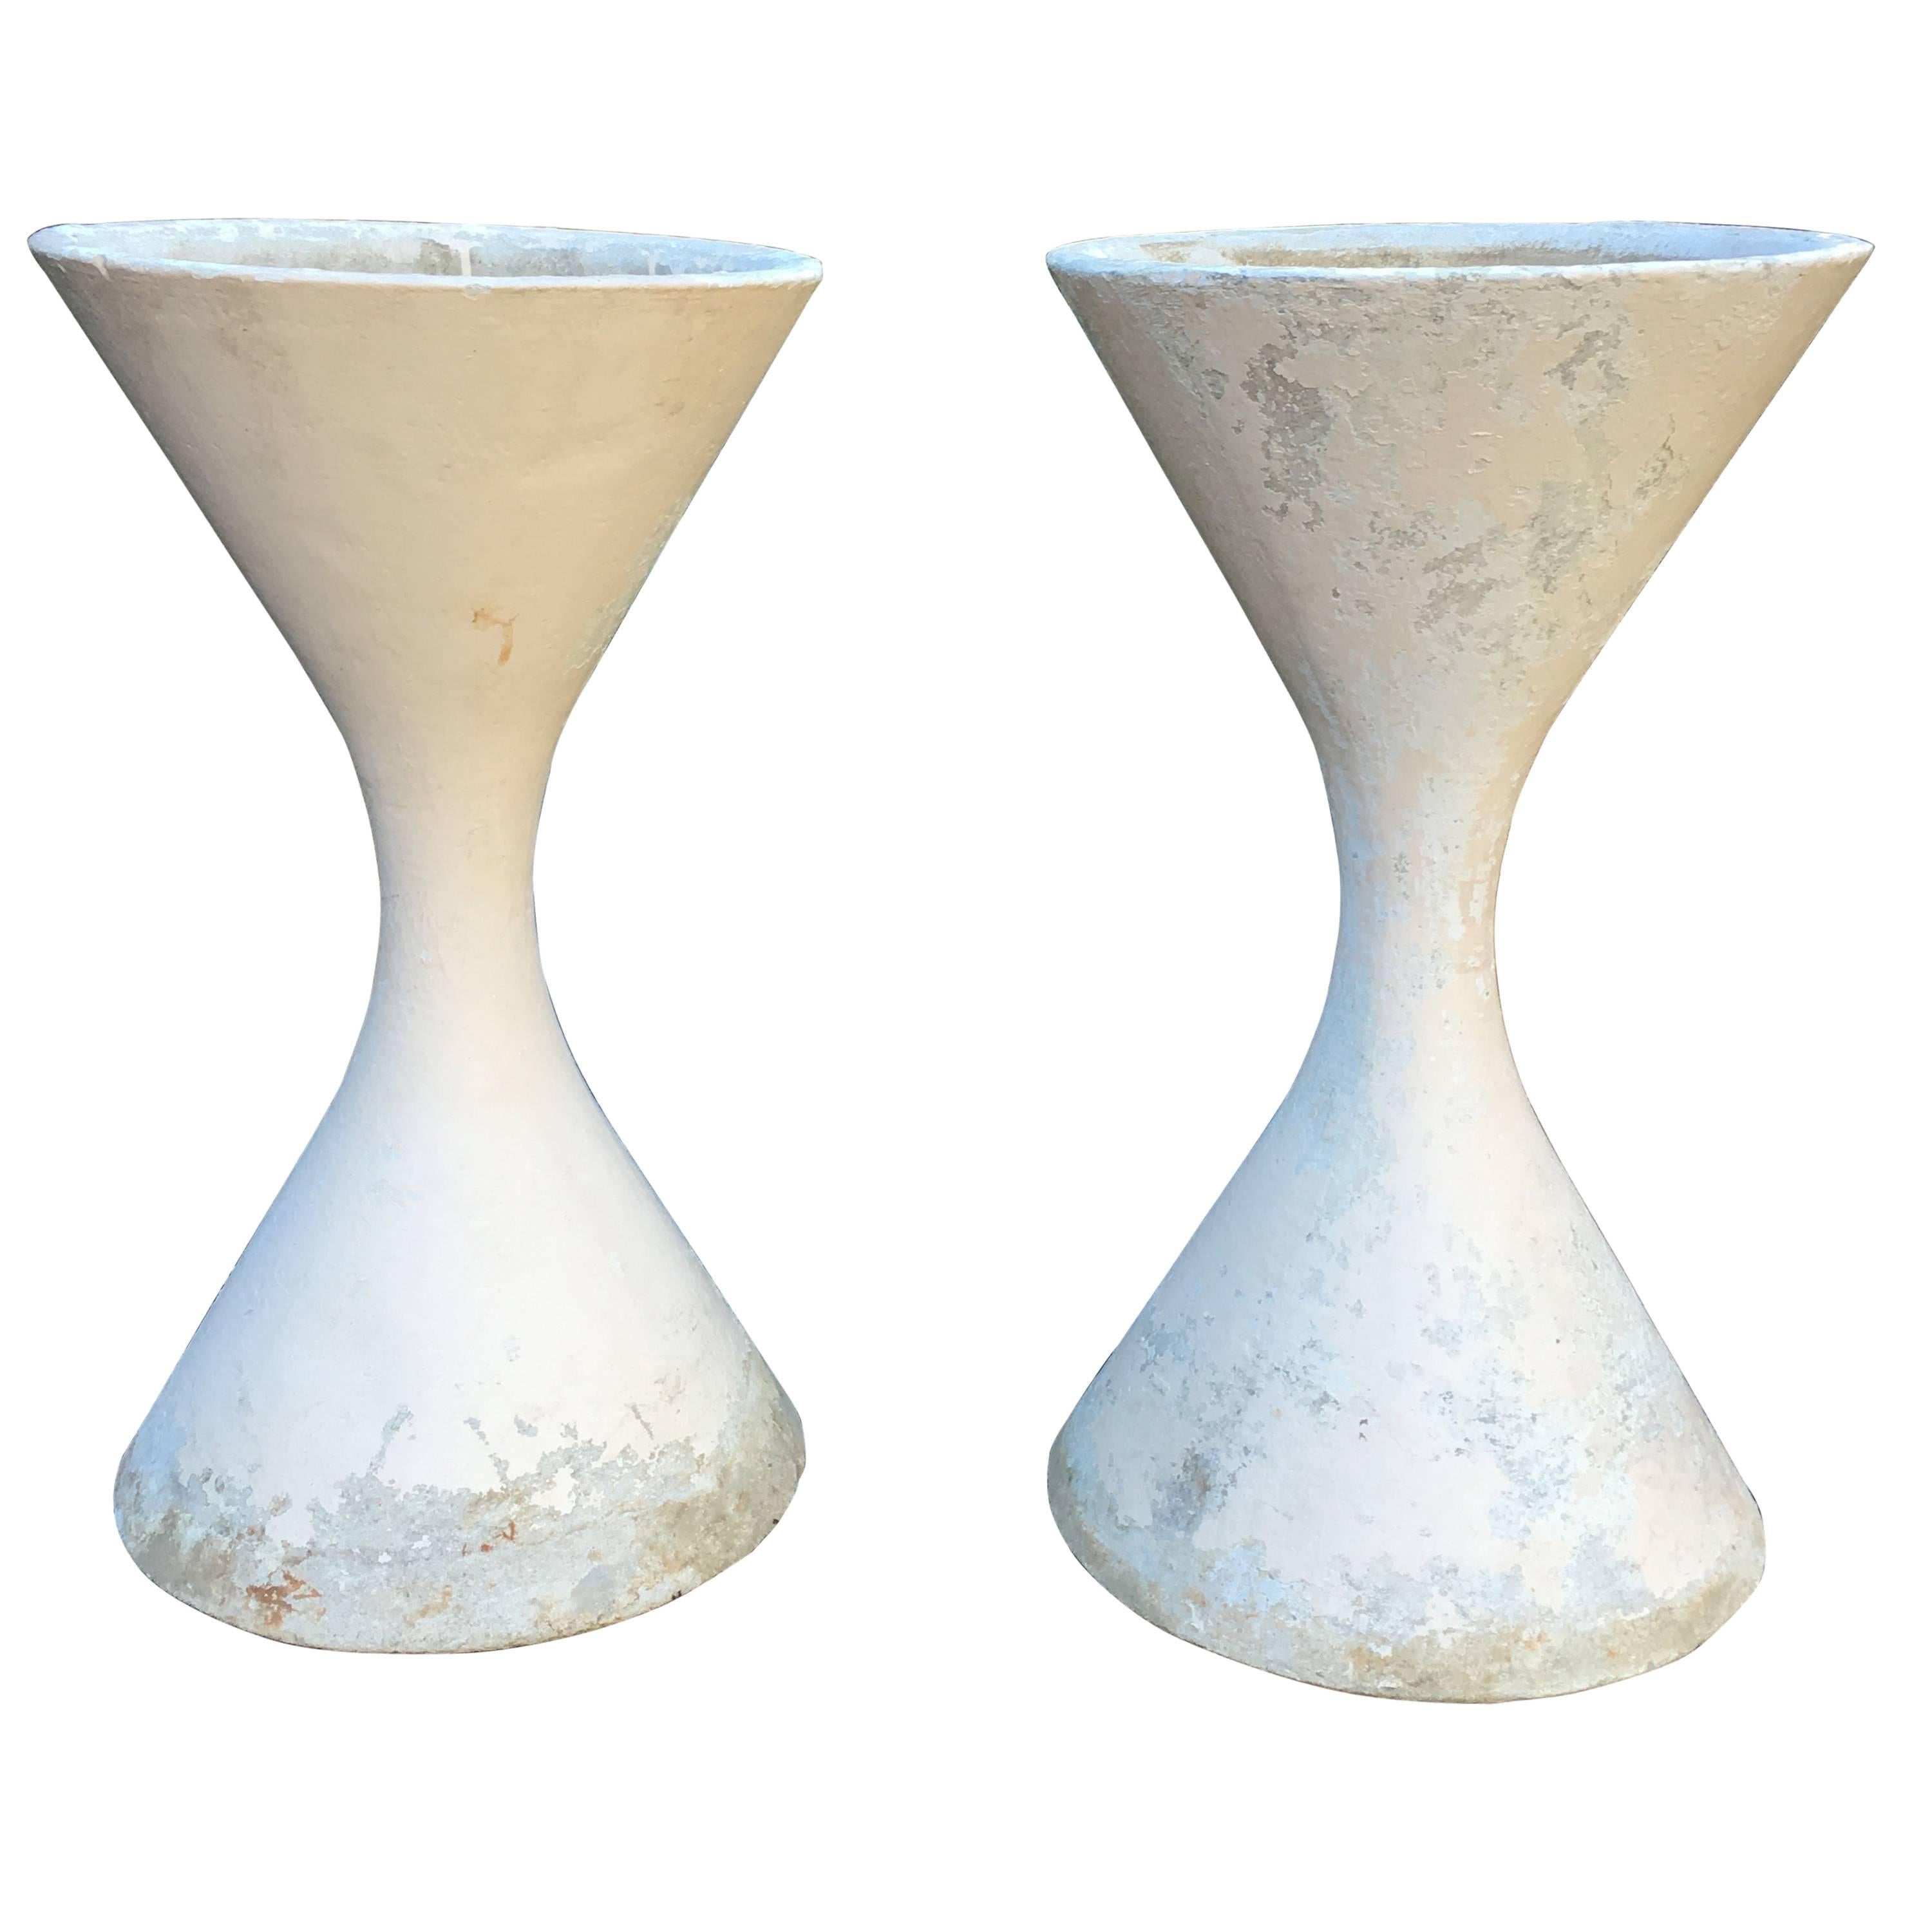 Pair of Willy Guhl Diabolo Hourglass Planters